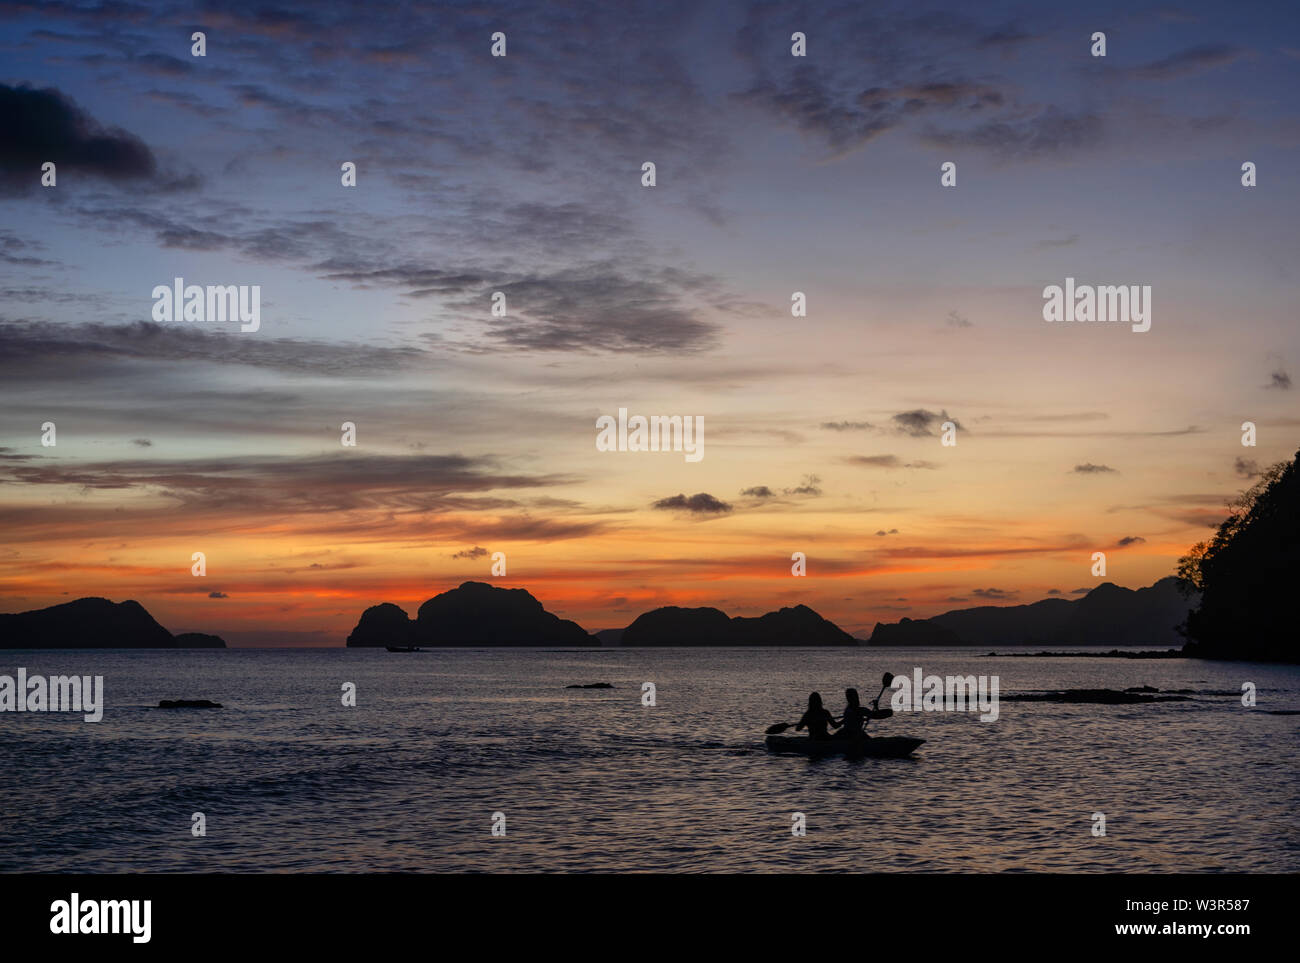 Silhouette of two women paddle in a kayak on the sea along the rocks at sunset, Las Cabanas Beach, Philippines Stock Photo